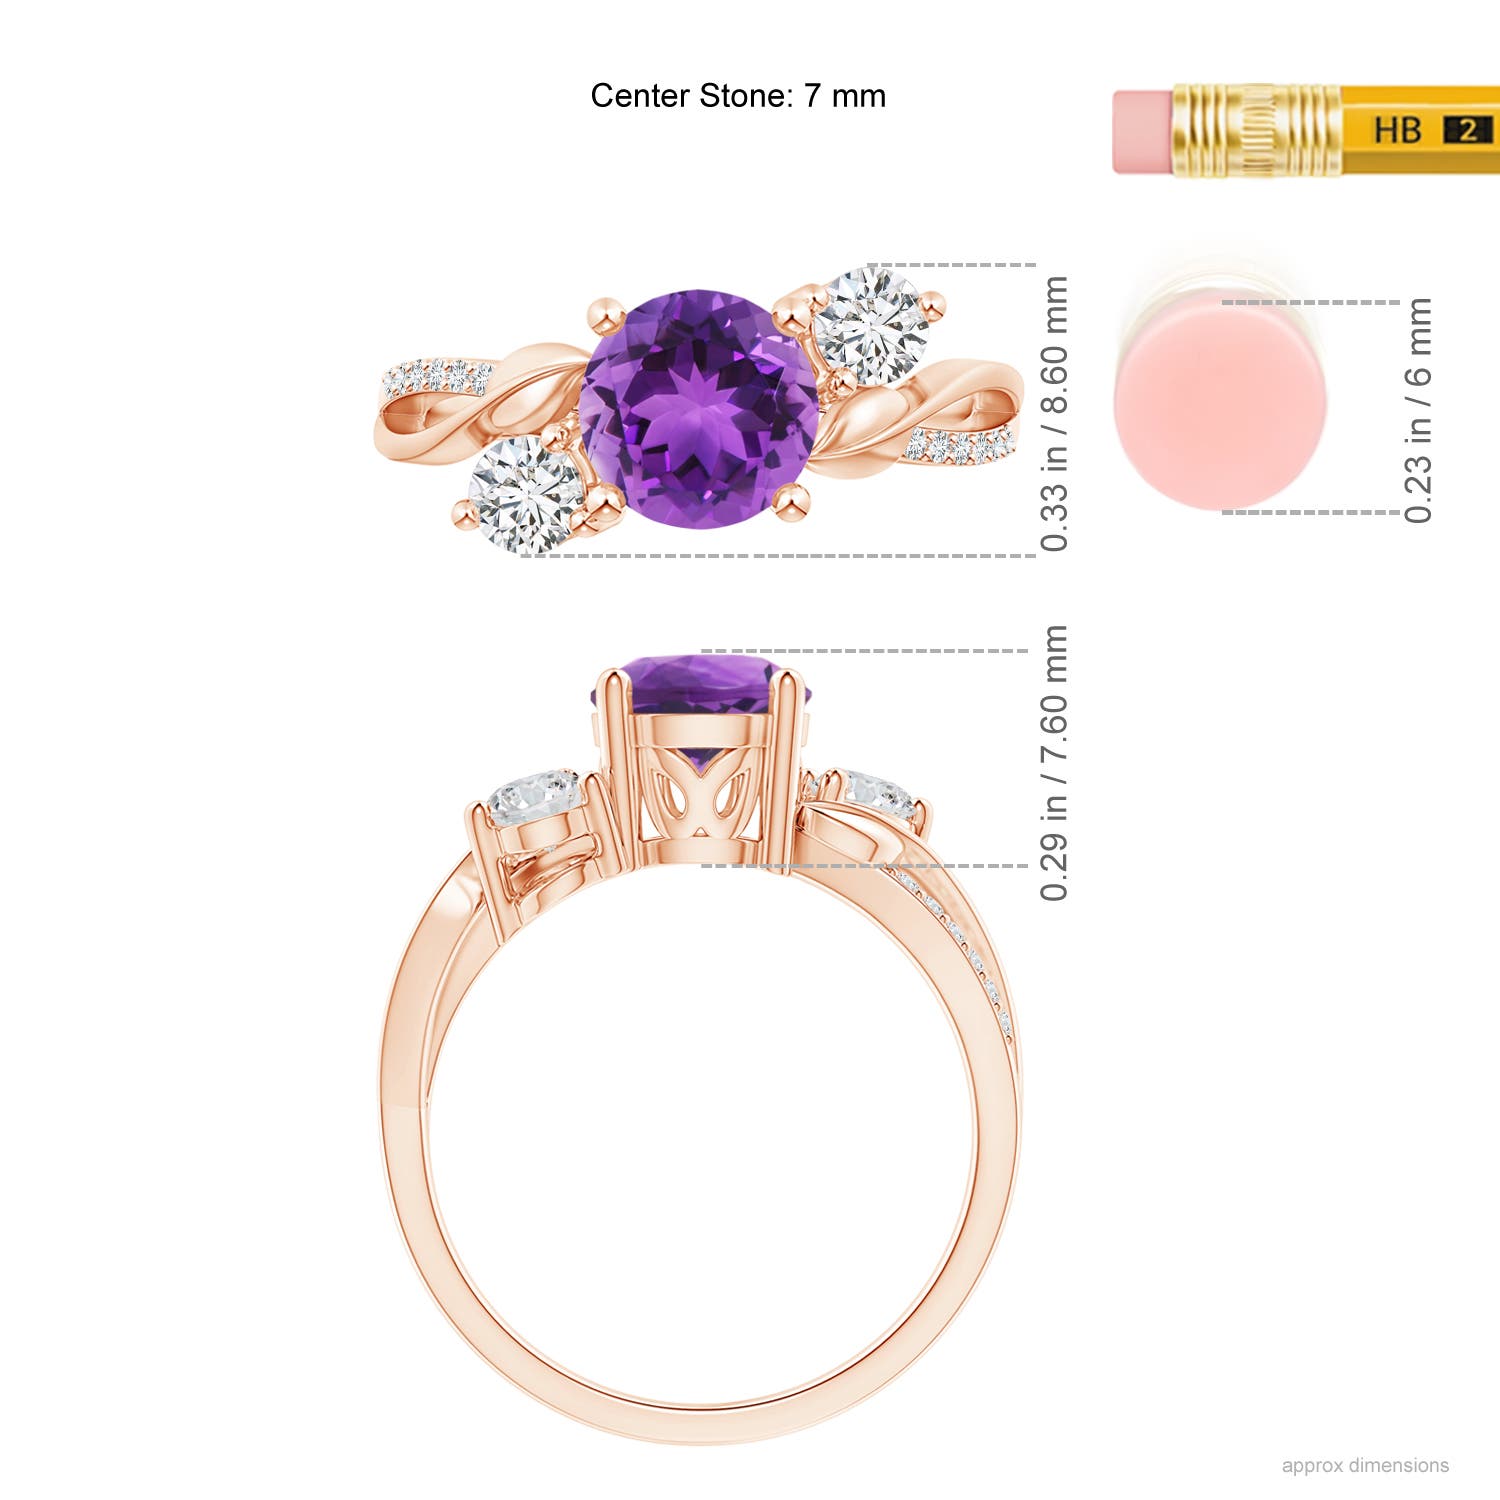 AAA - Amethyst / 1.53 CT / 14 KT Rose Gold